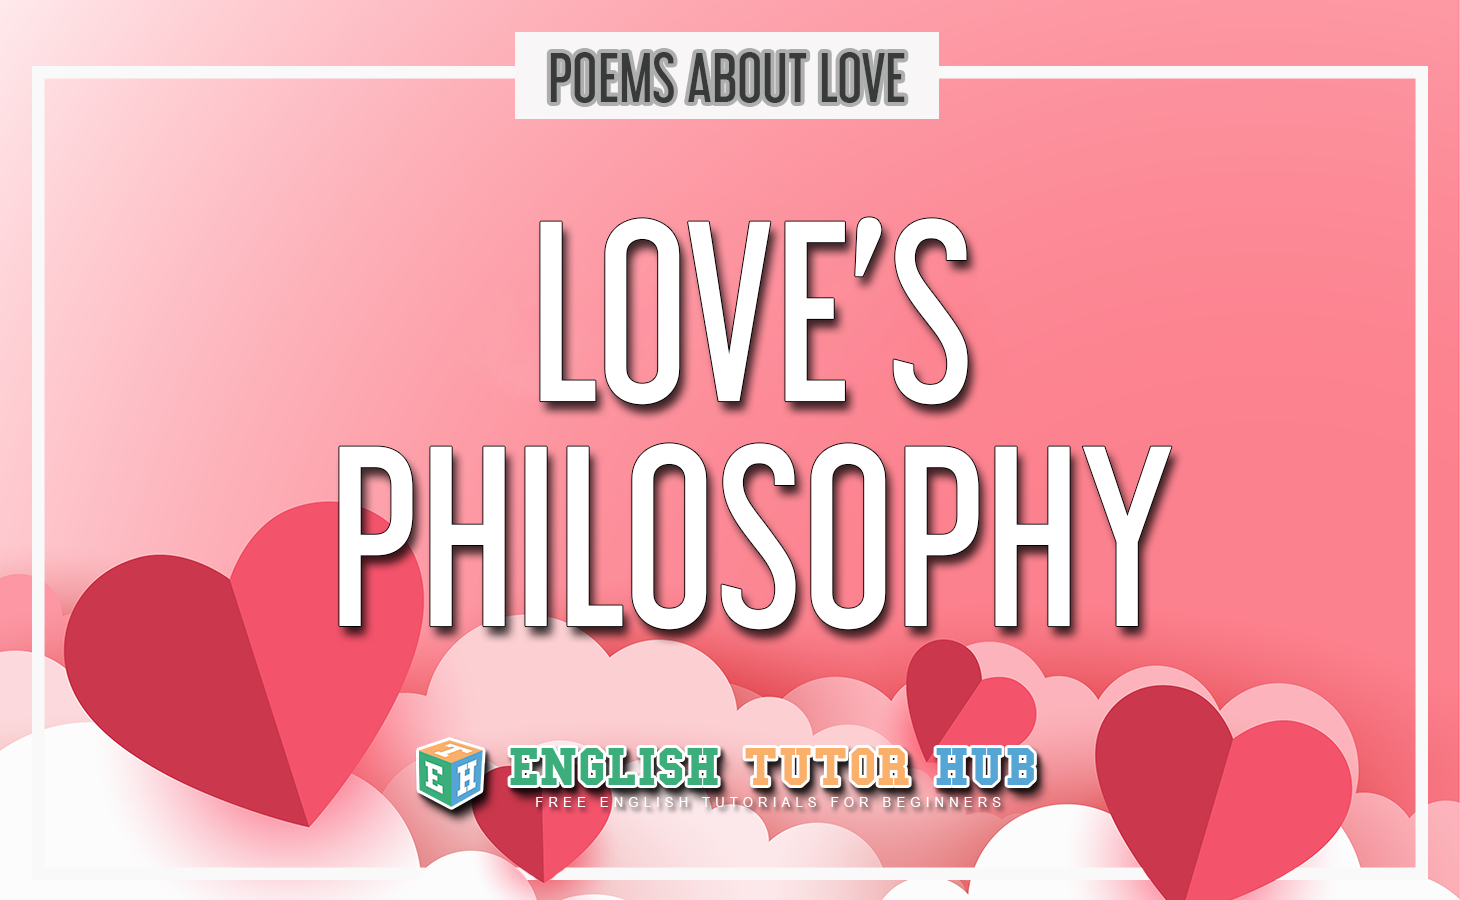 Love's Philosophy - Poem by Percy Bysshe Shelley Summary [2022]